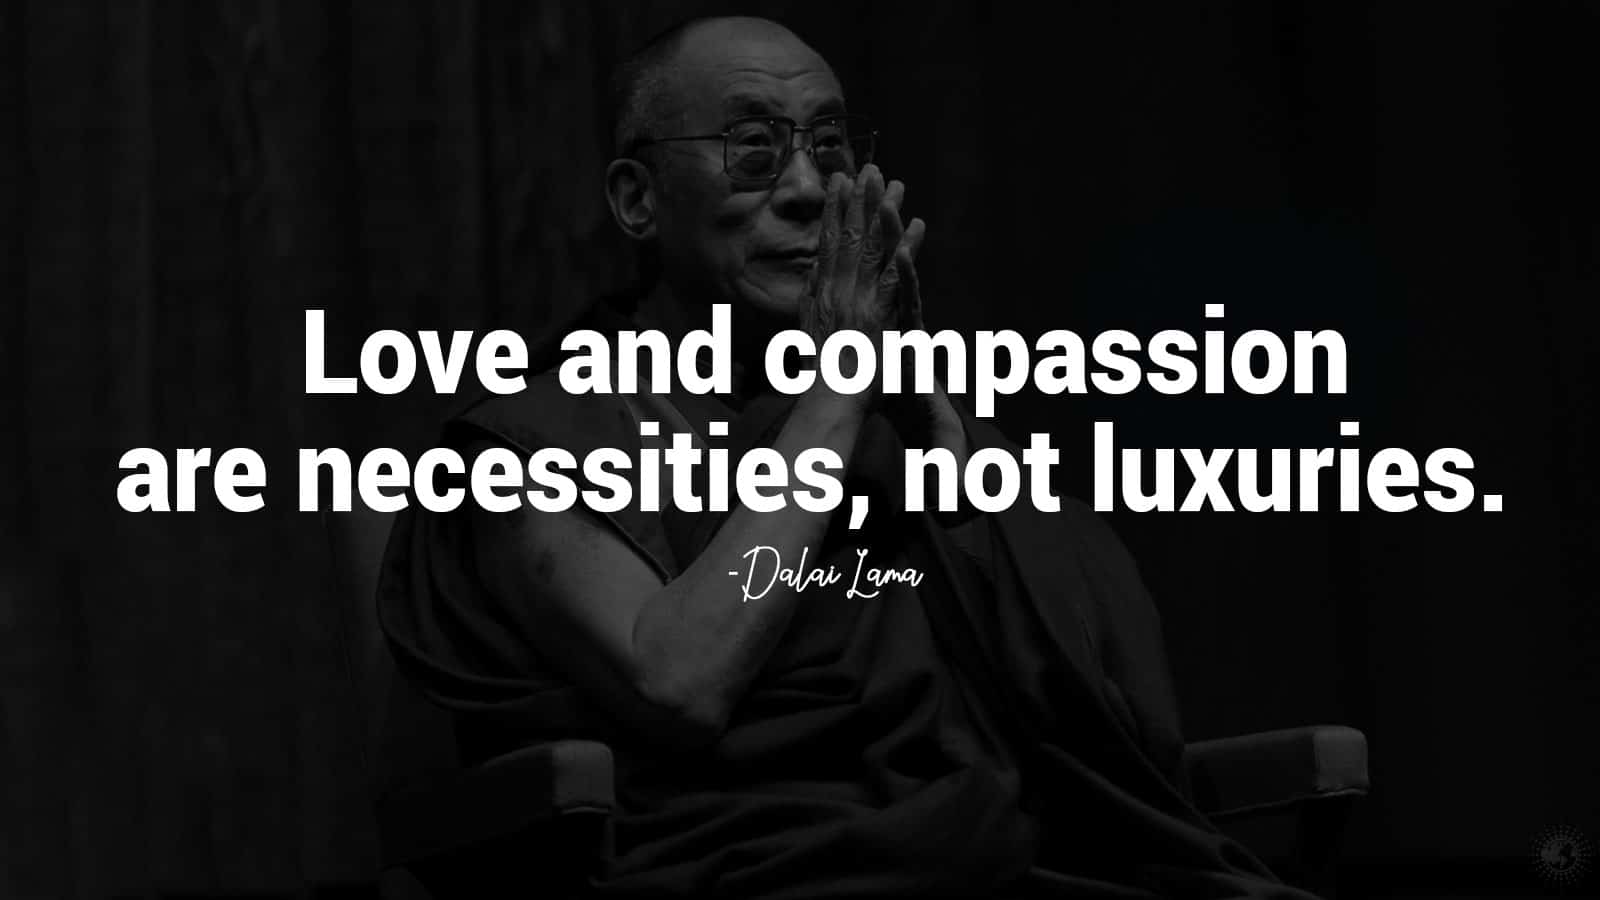 18 Inspirational Love Quotes from the Dalai Lama